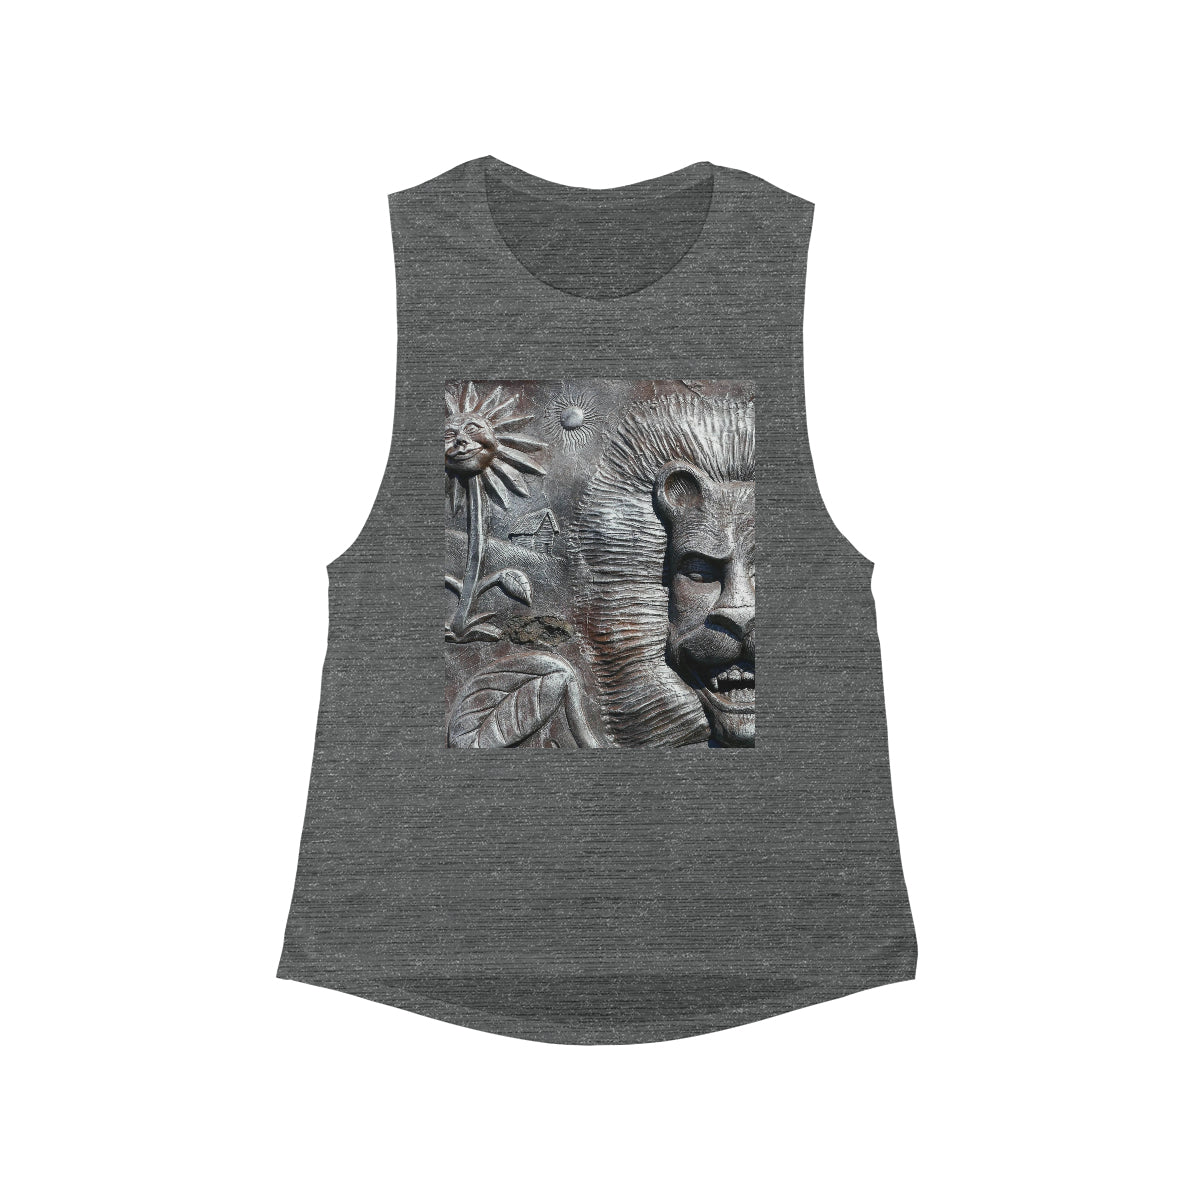 Lion's Friends Forever V2 - Women's Flowy Scoop Muscle Tank - Fry1Productions